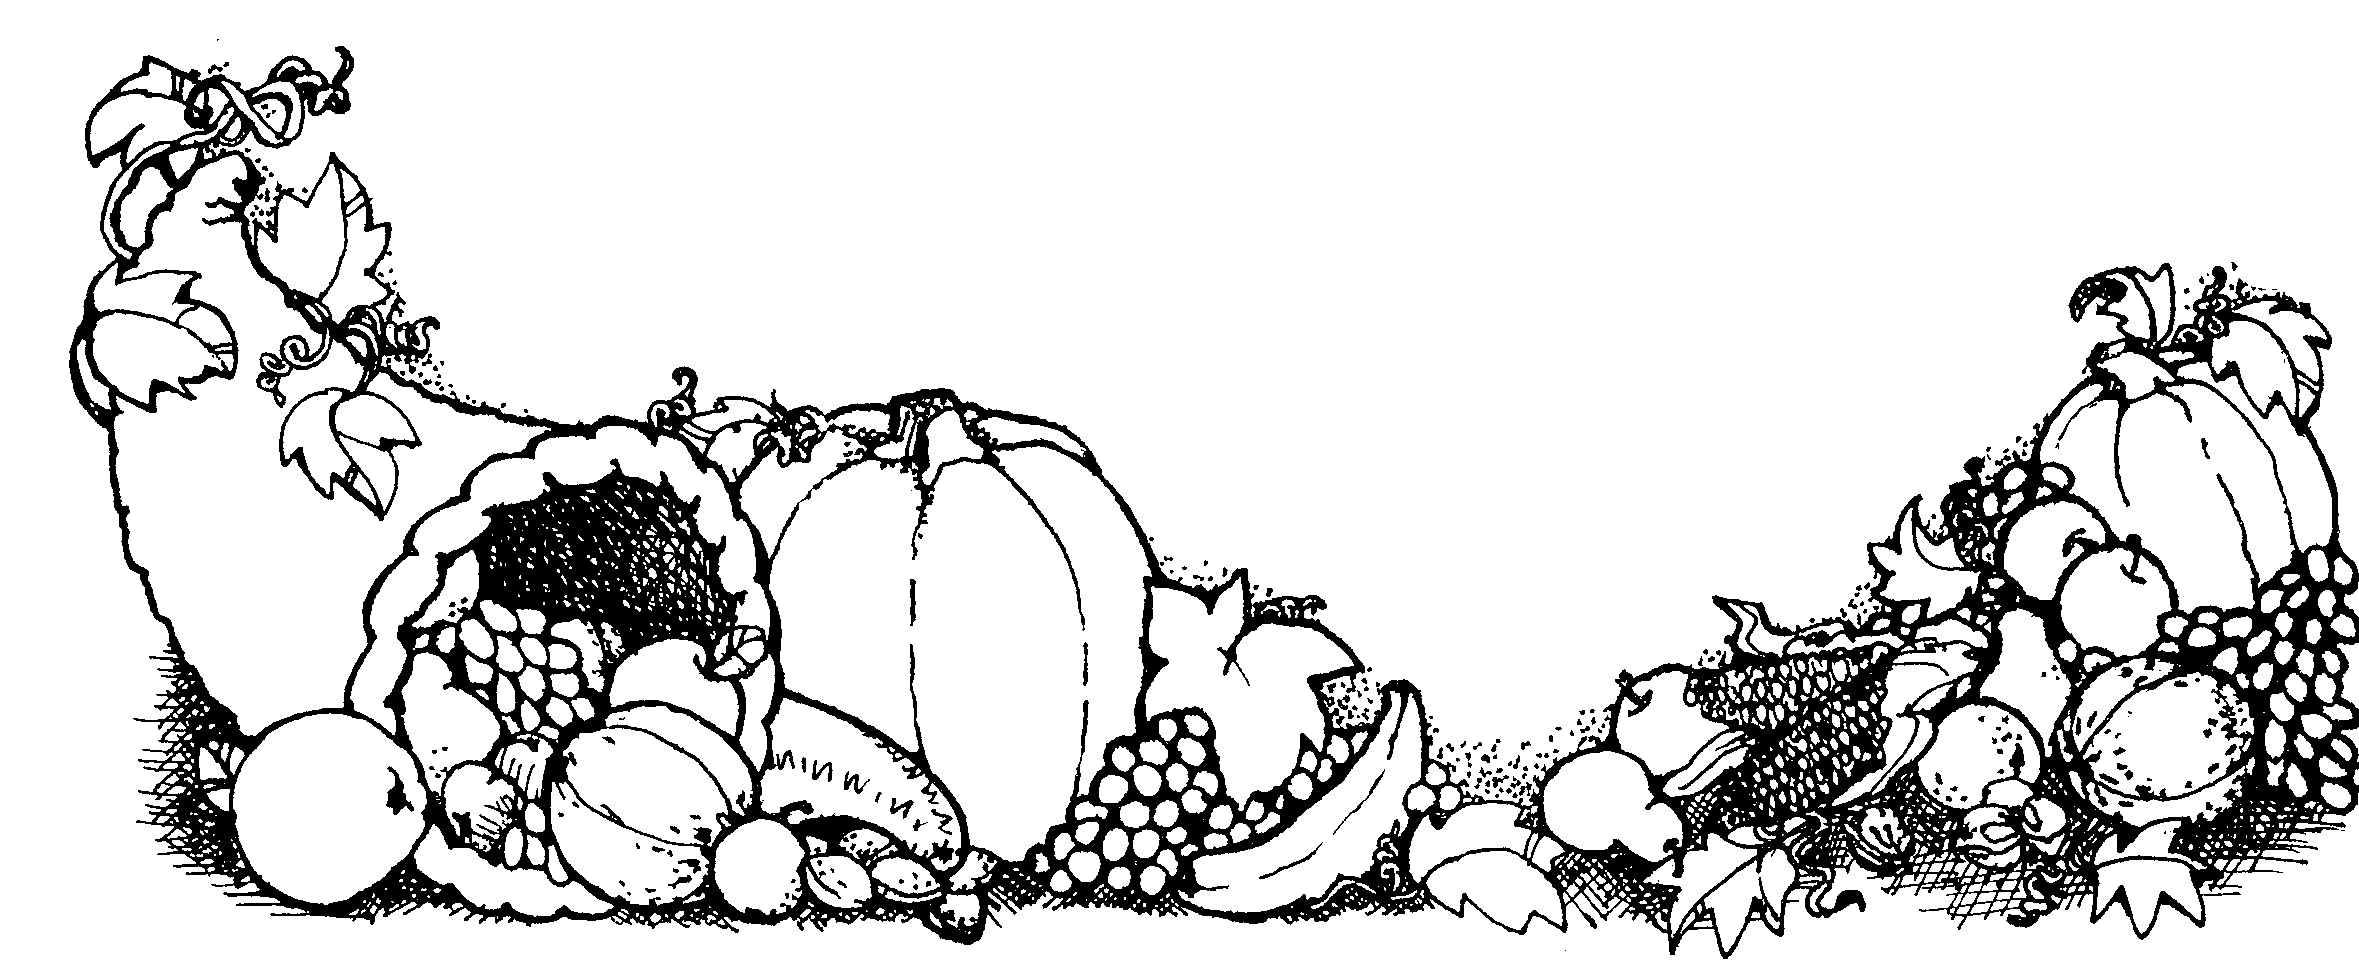 Thanksgiving black and white free thanksgiving clipart clip art 3.